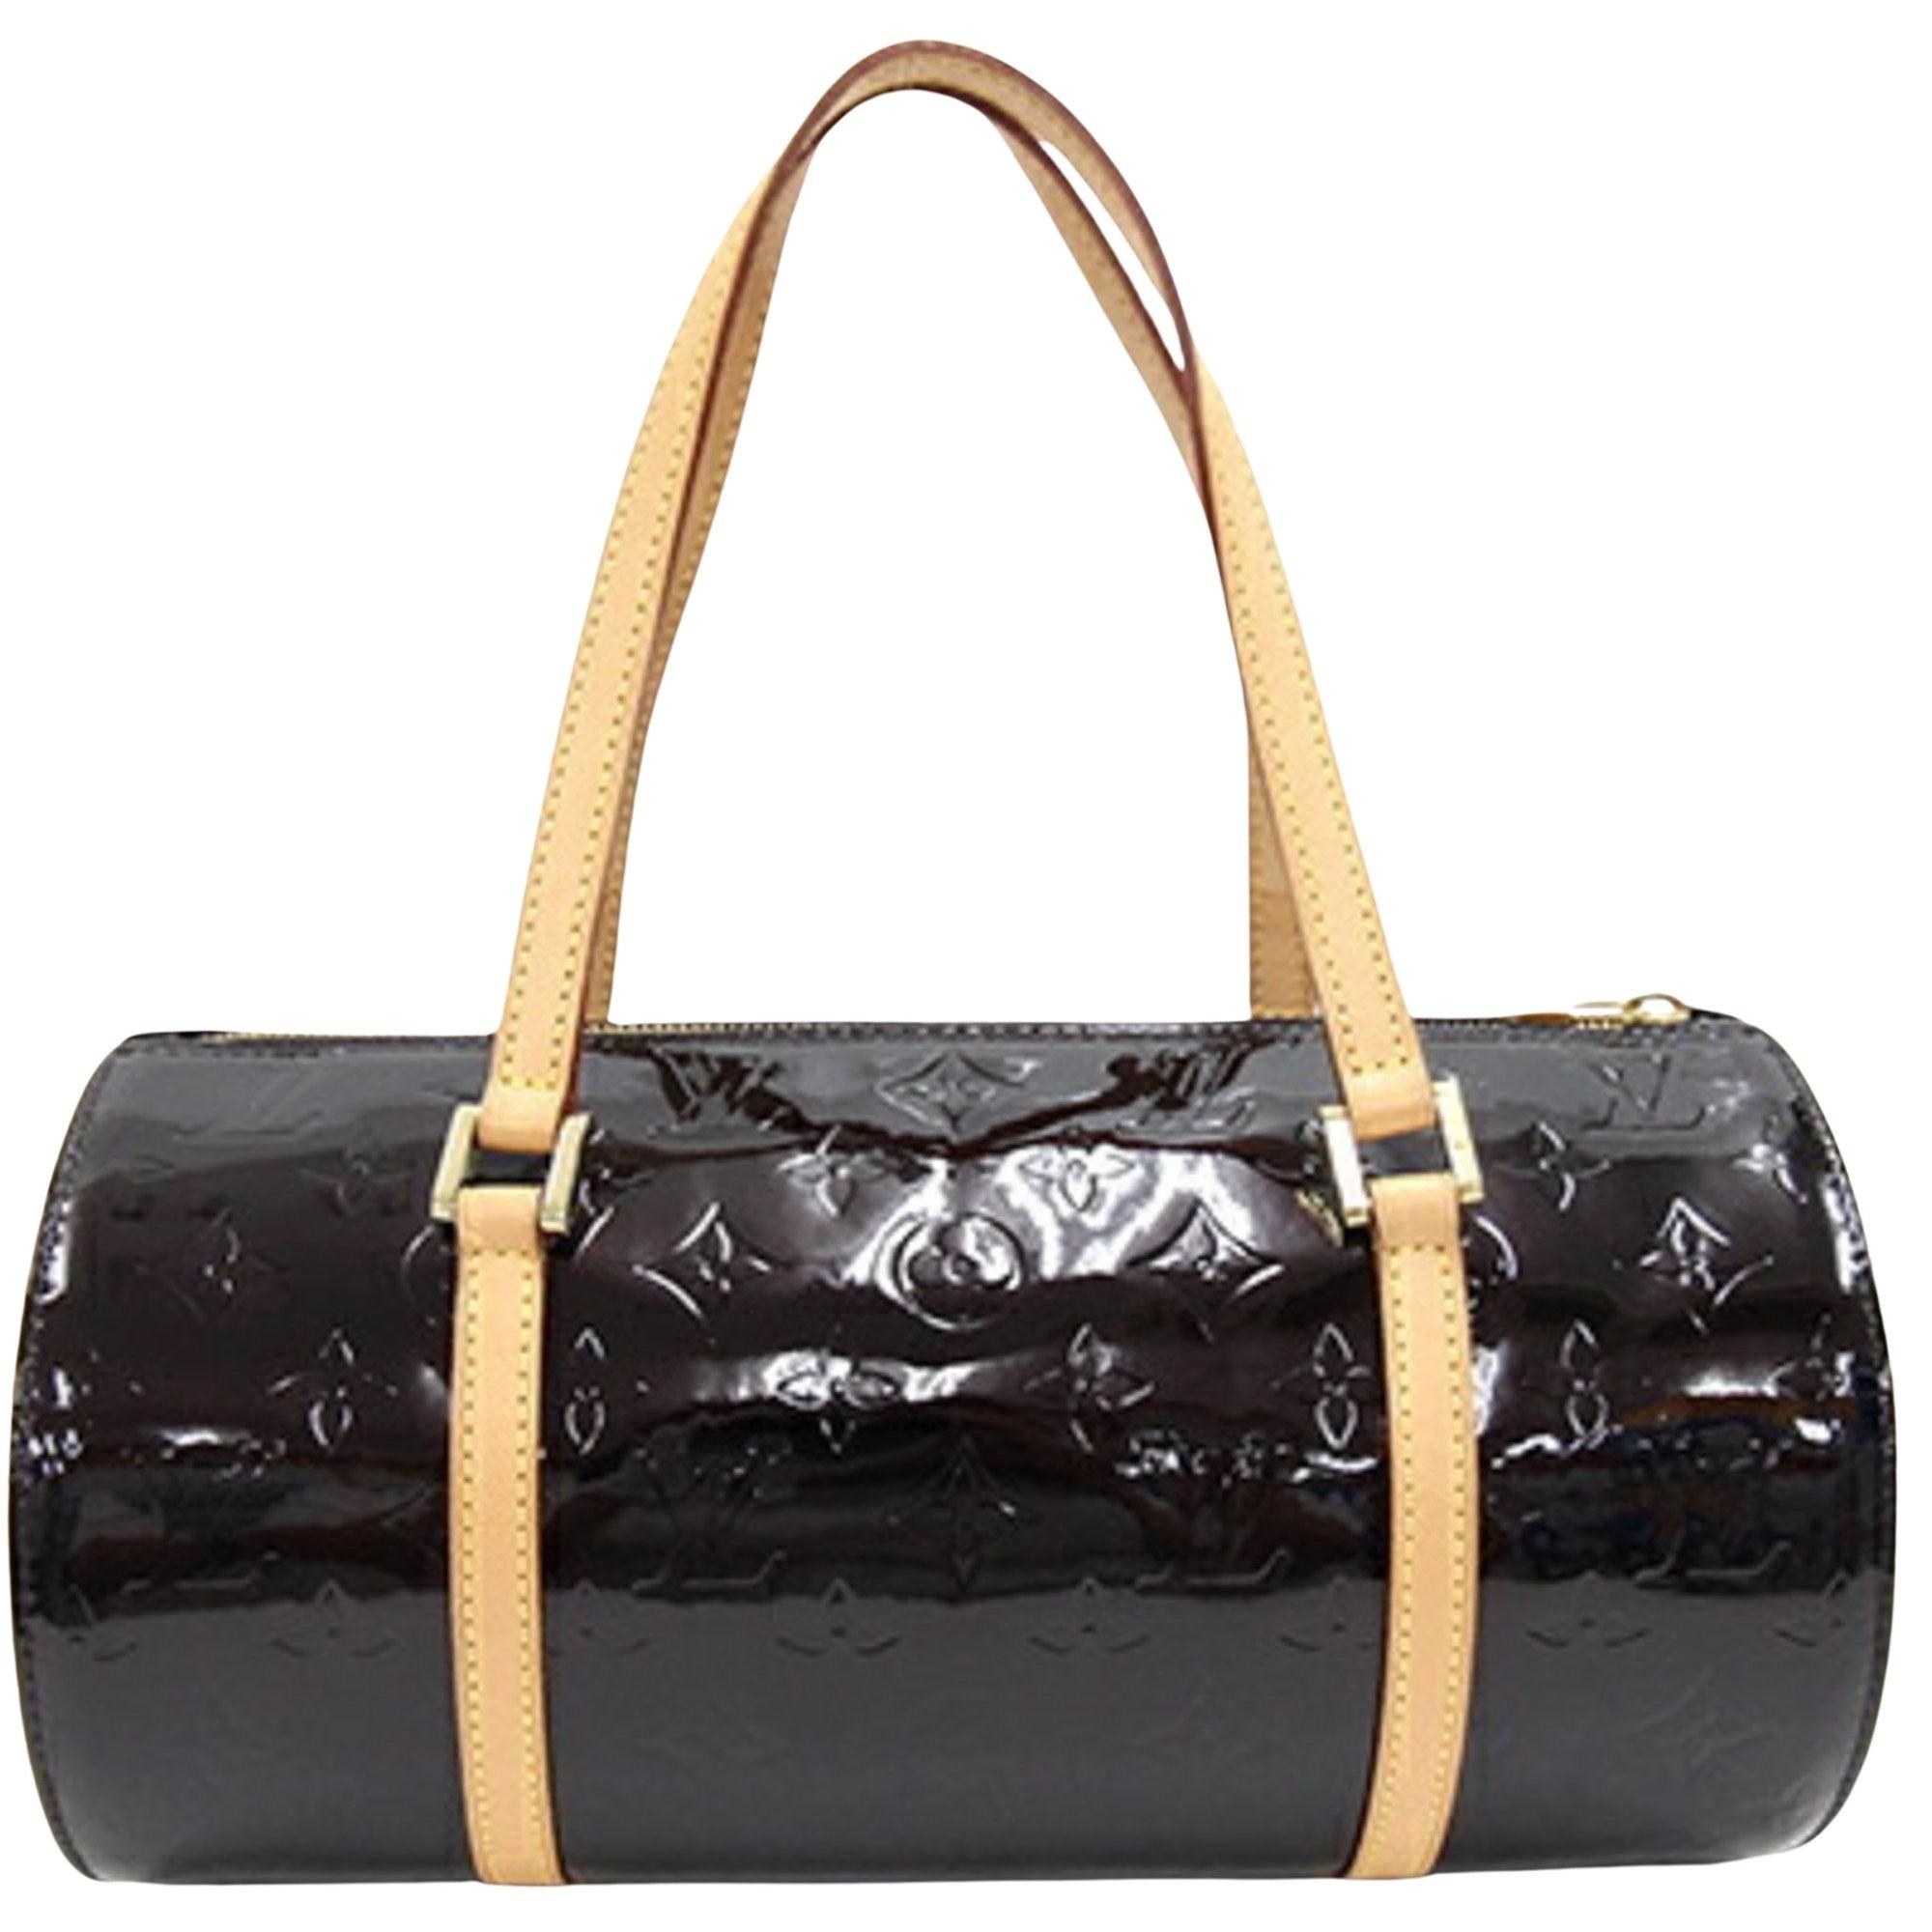 Louis Vuitton Bedford Patent Leather Shoulder Bag (pre-owned) in Black